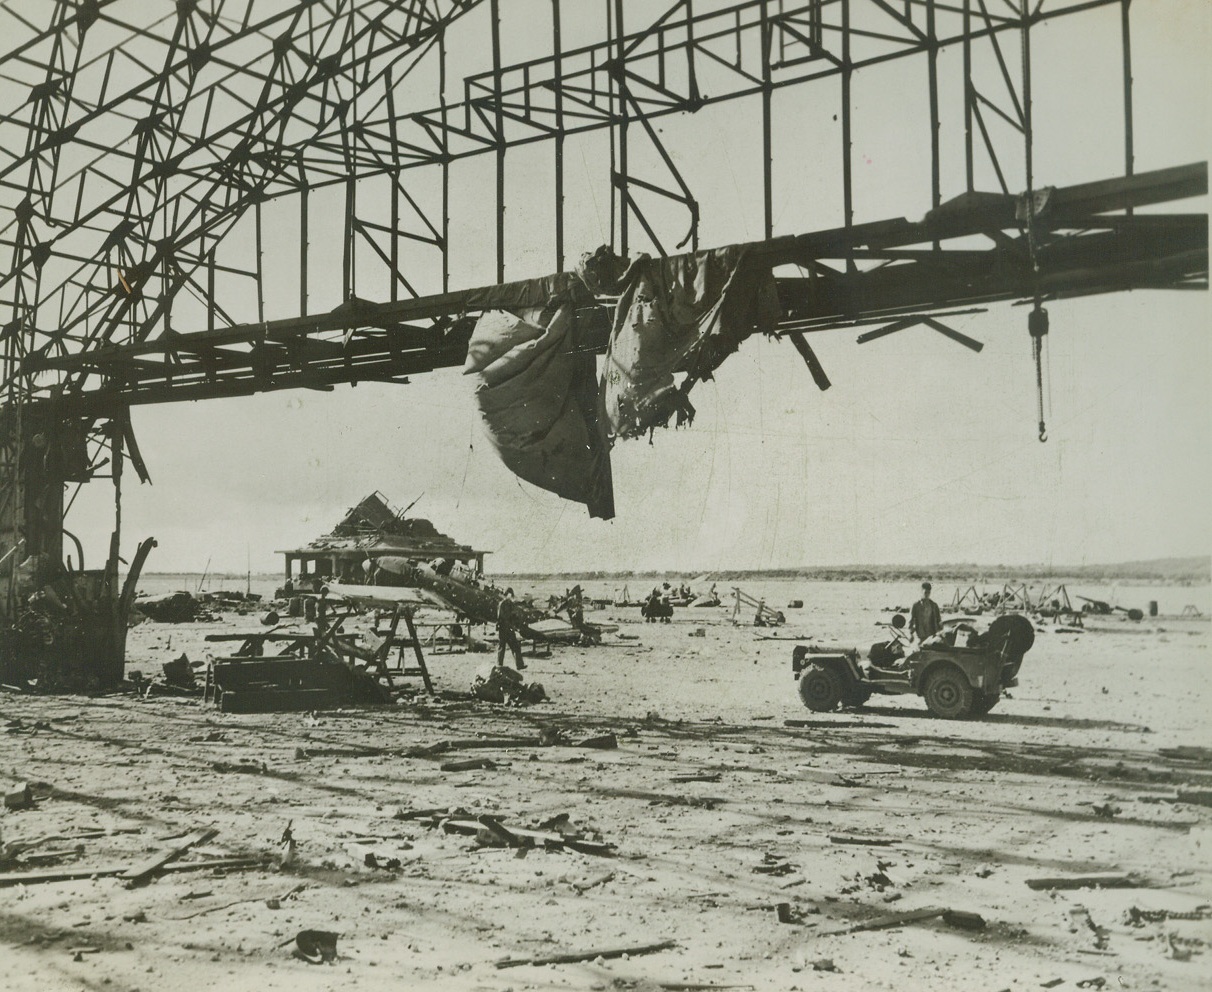 After Yank Bombardment, 8/11/1944. TINIAN – Pre-invasion naval and aerial bombardment completely shattered enemy installations and equipment at this Jap airport on the Northern end of Tinian. Marine forces captured the field shortly after hitting the beach and reconstruction of the strip is already underway. Credit: Marine Corps photo from ACME;